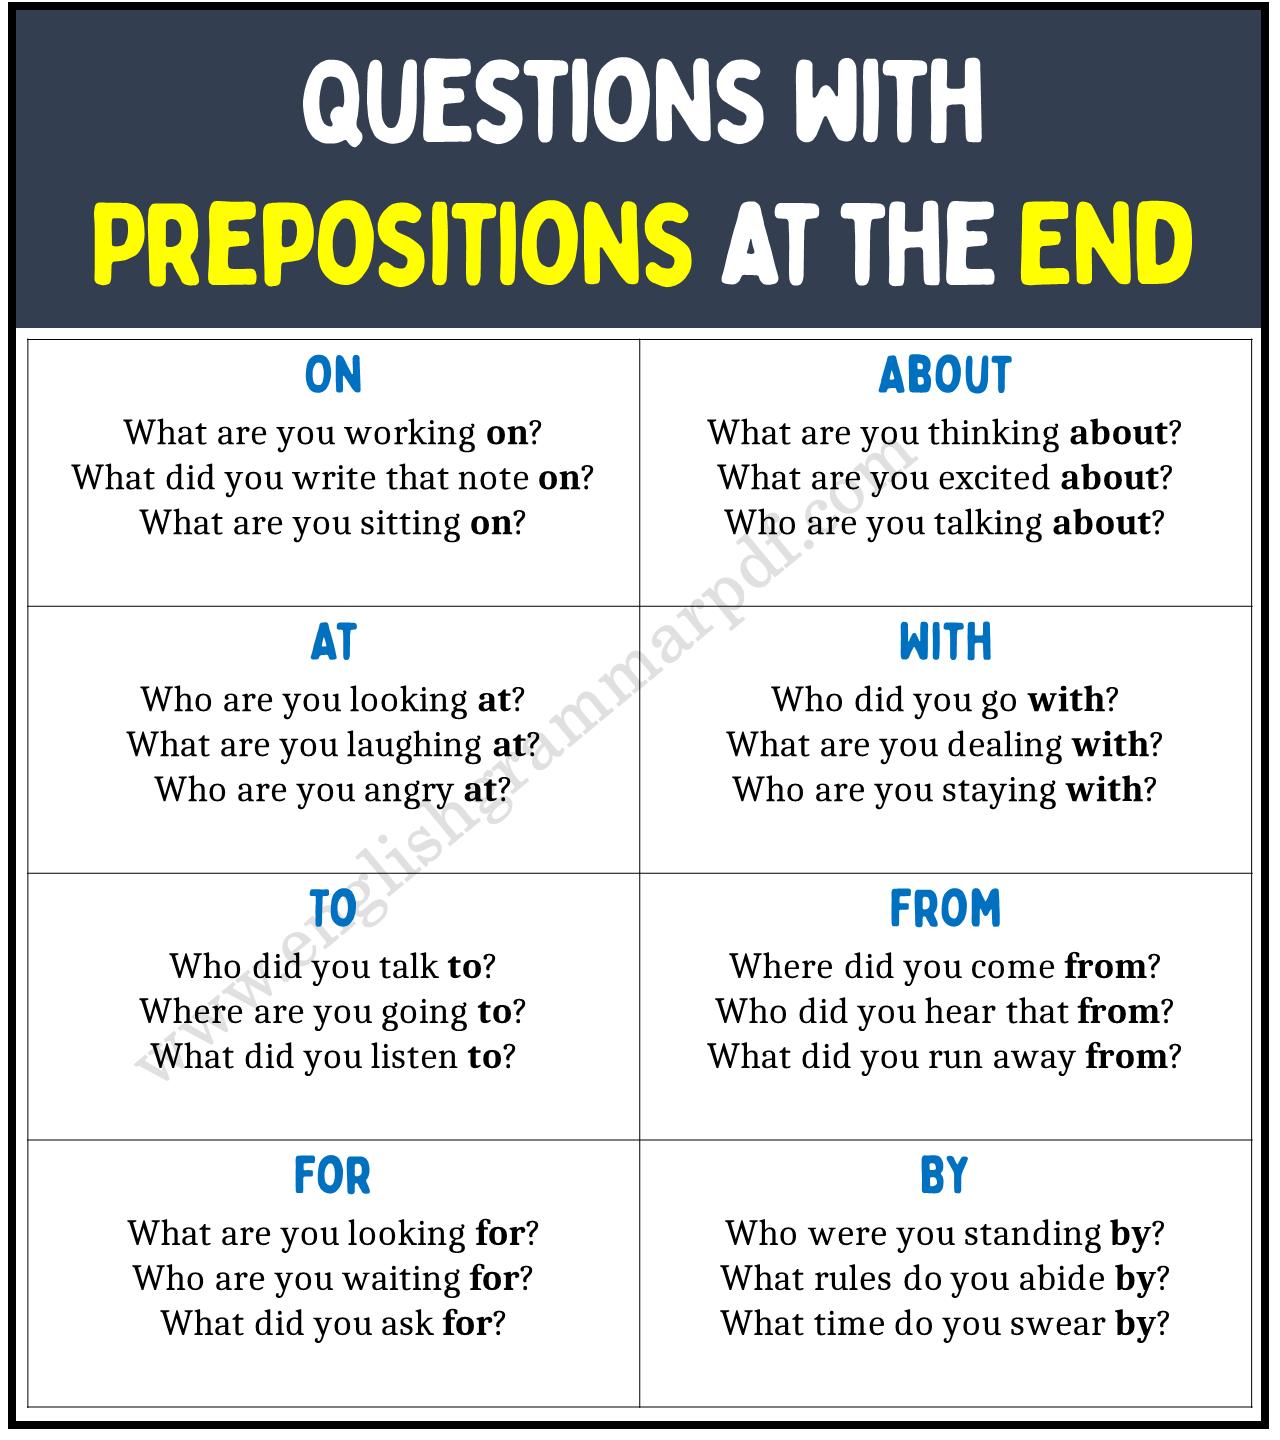 Examples of Questions with Prepositions at the End